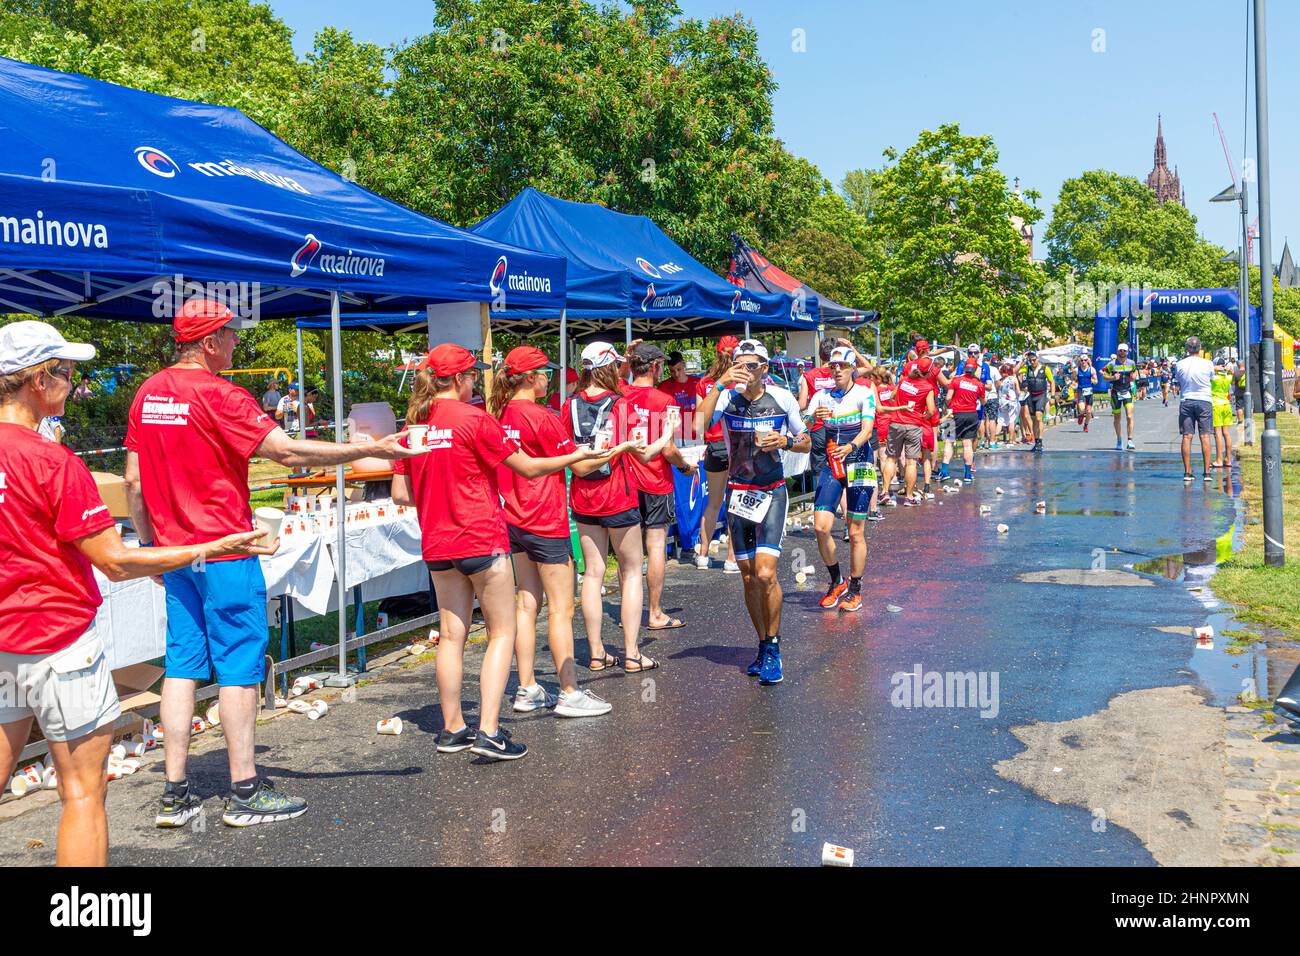 athletes drink mineral water or get a shower while running at the frankfurt ironman 2019. Because of the heat the caterin stations are enlarged Stock Photo